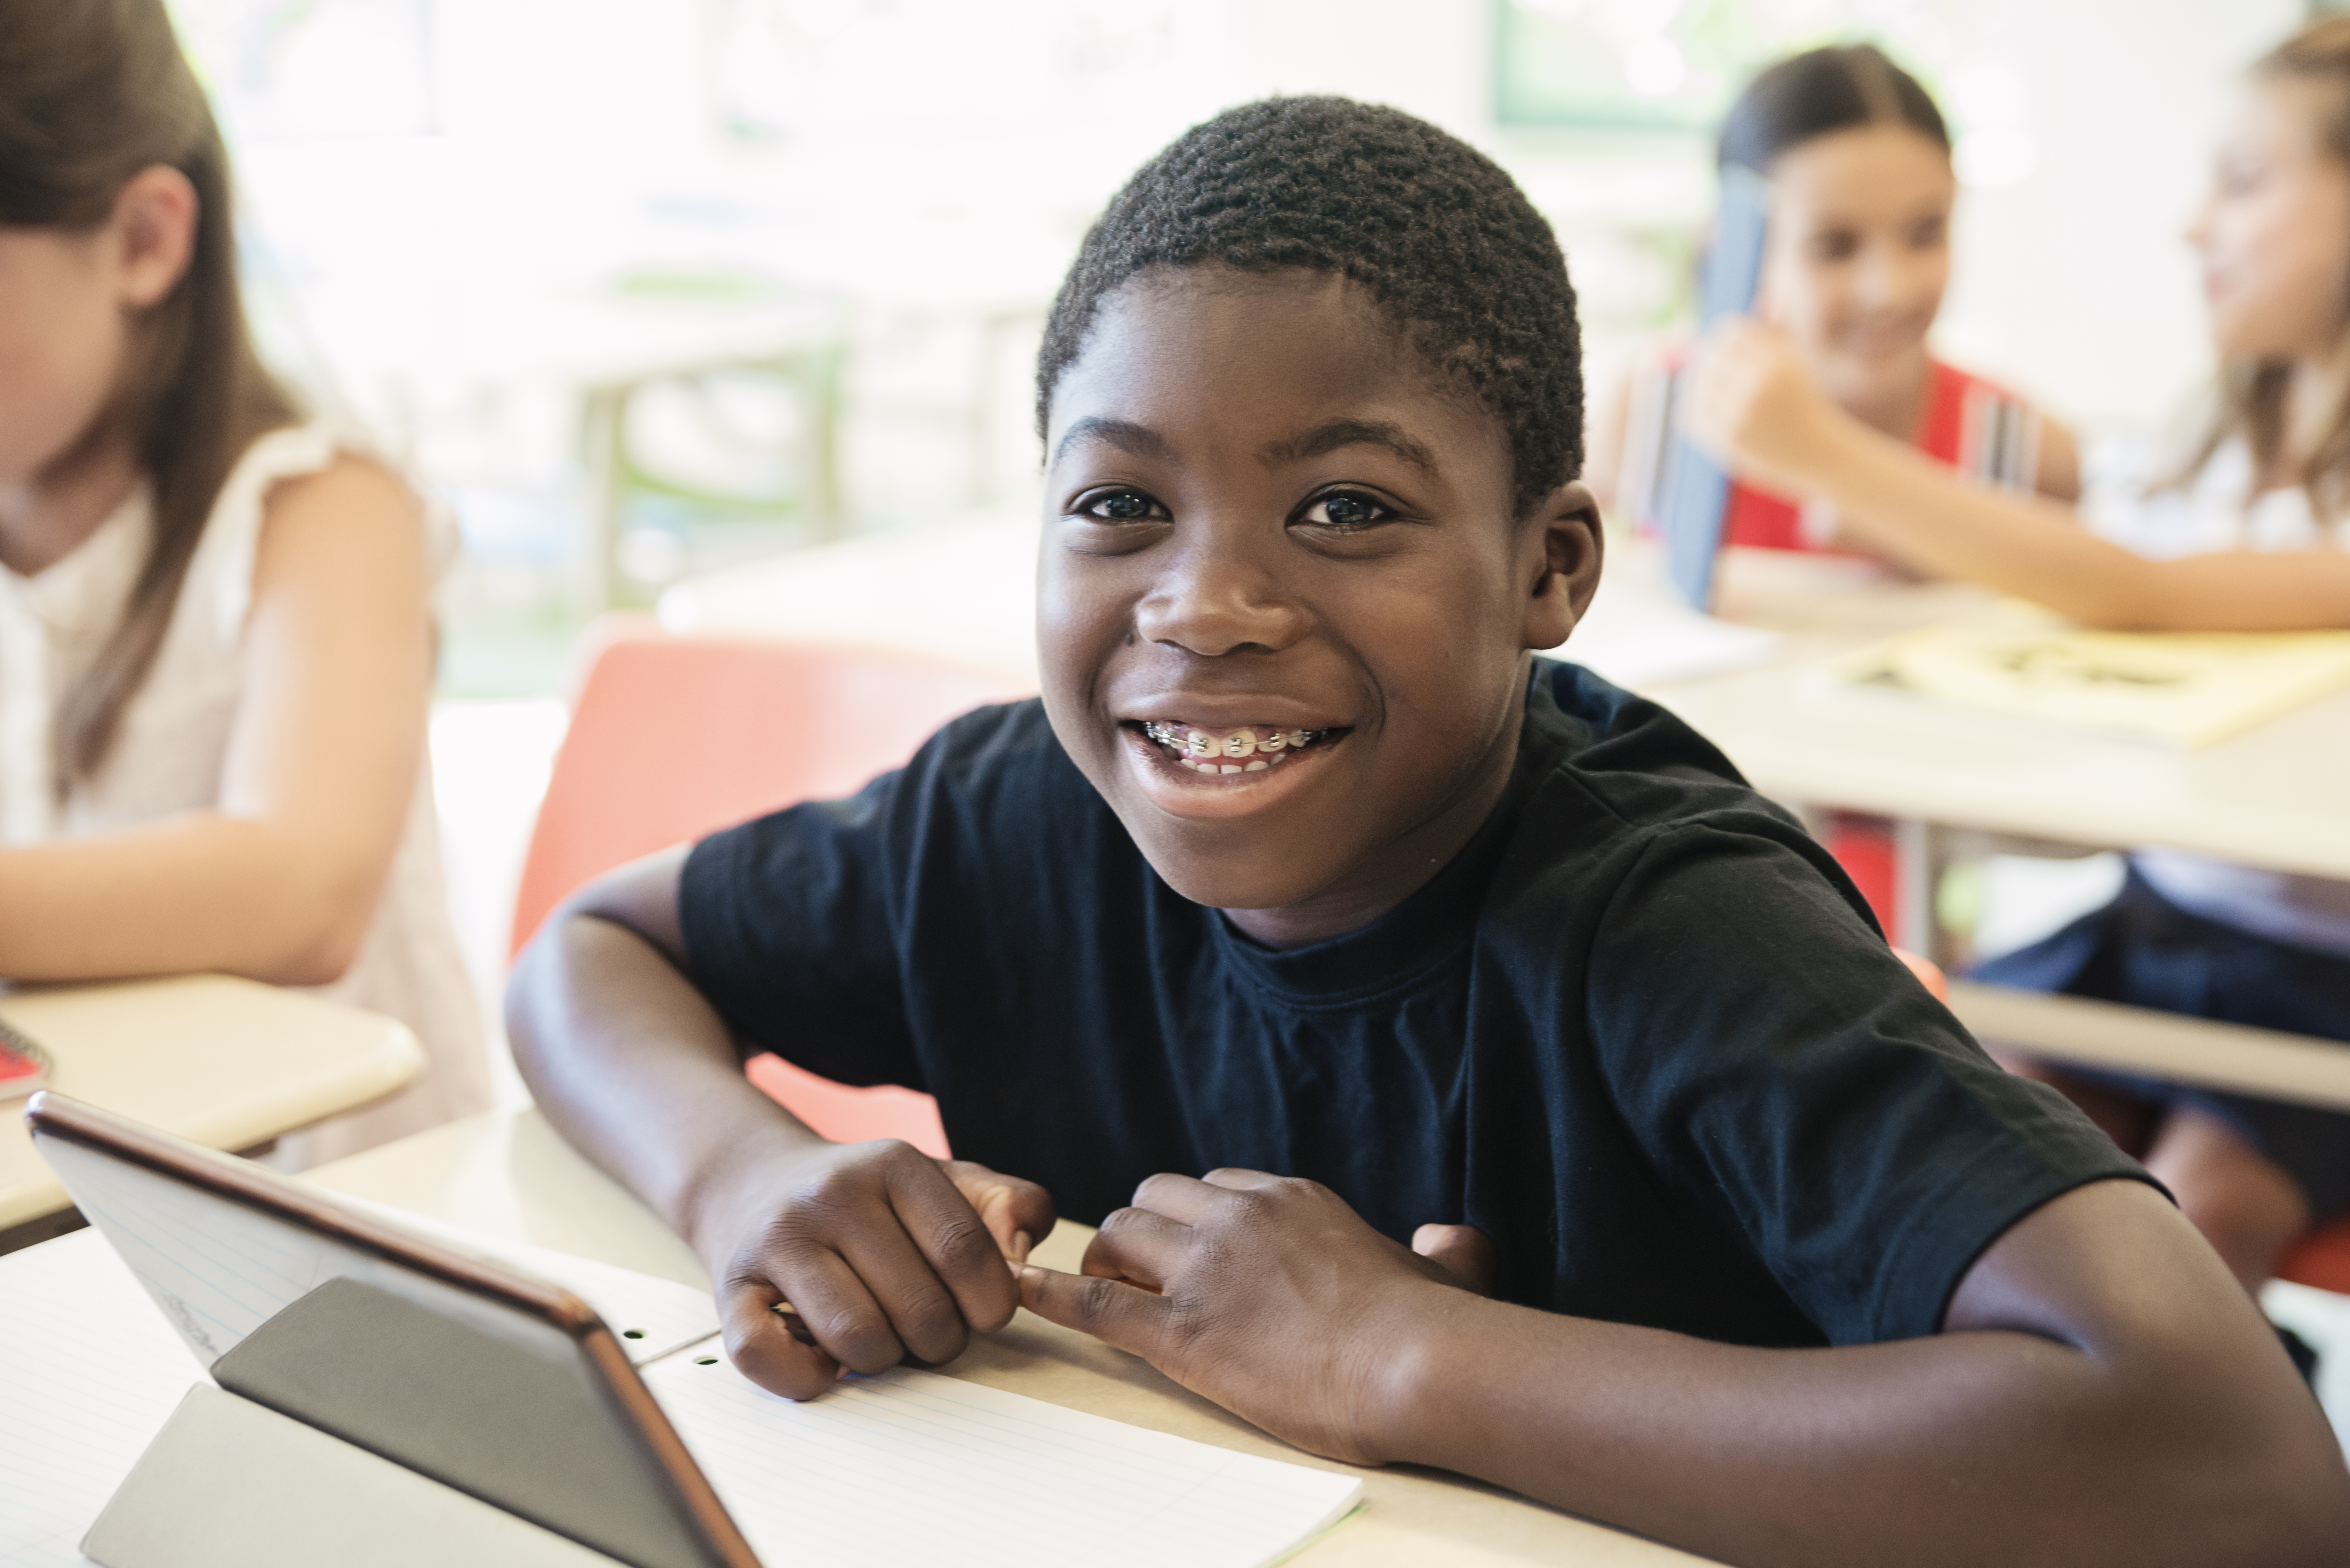 African-american boy using electronic tablet in classroom. He wear braces and is looking at the camera with a smile. Some schoolgirls in the background. Horizontal waist up indoors shot with copy space. This was taken in Quebec, Canada.